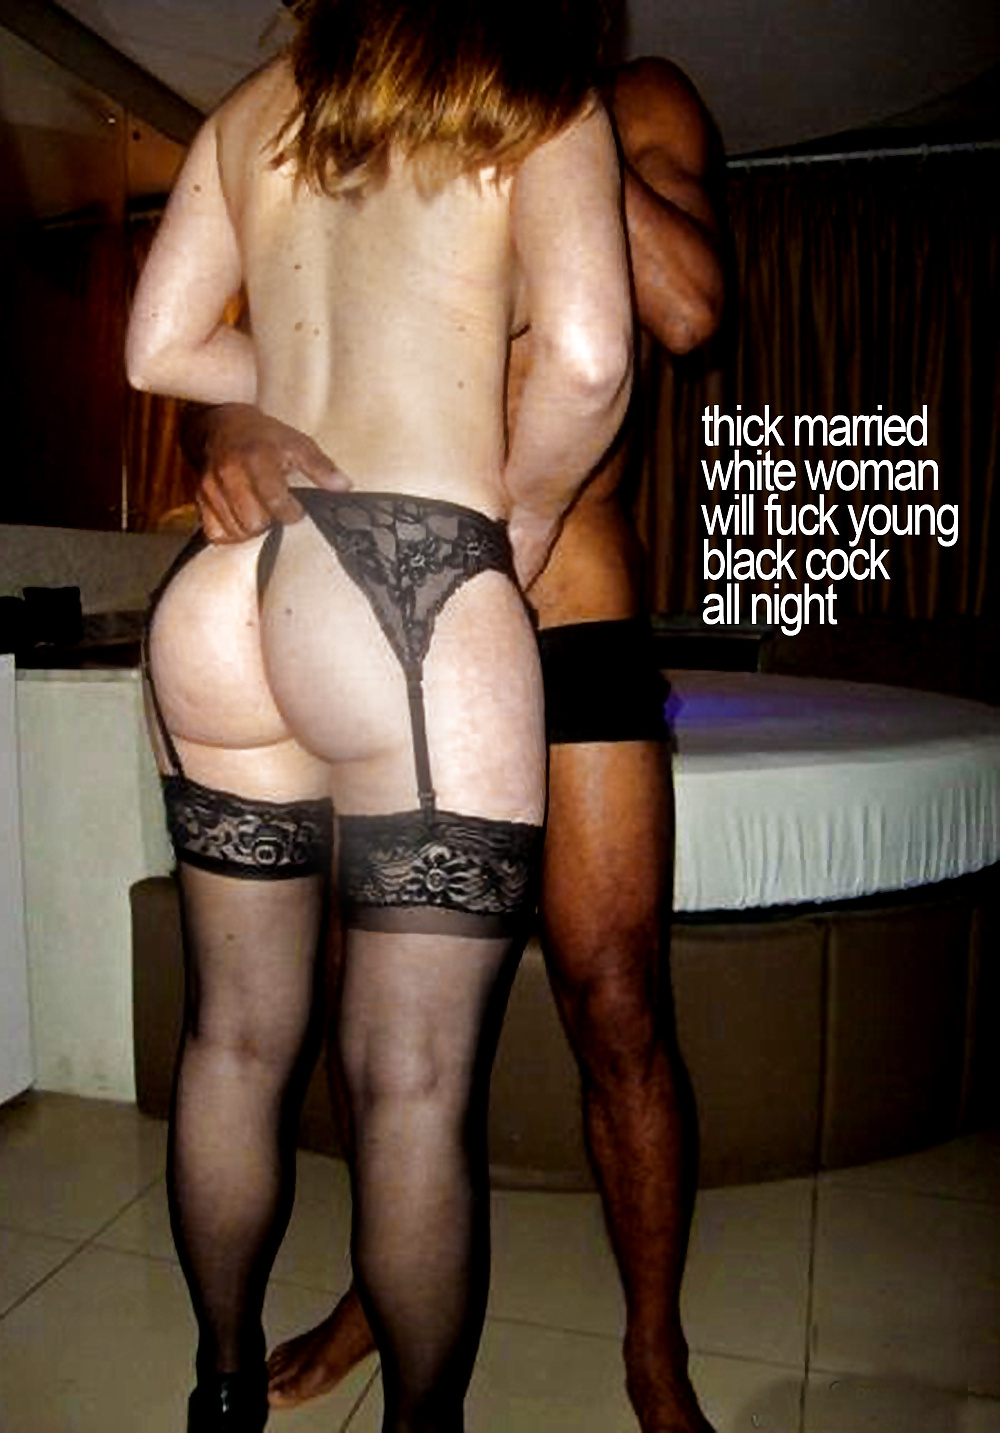 Lusting for the BBC inside the married white woman #33971608